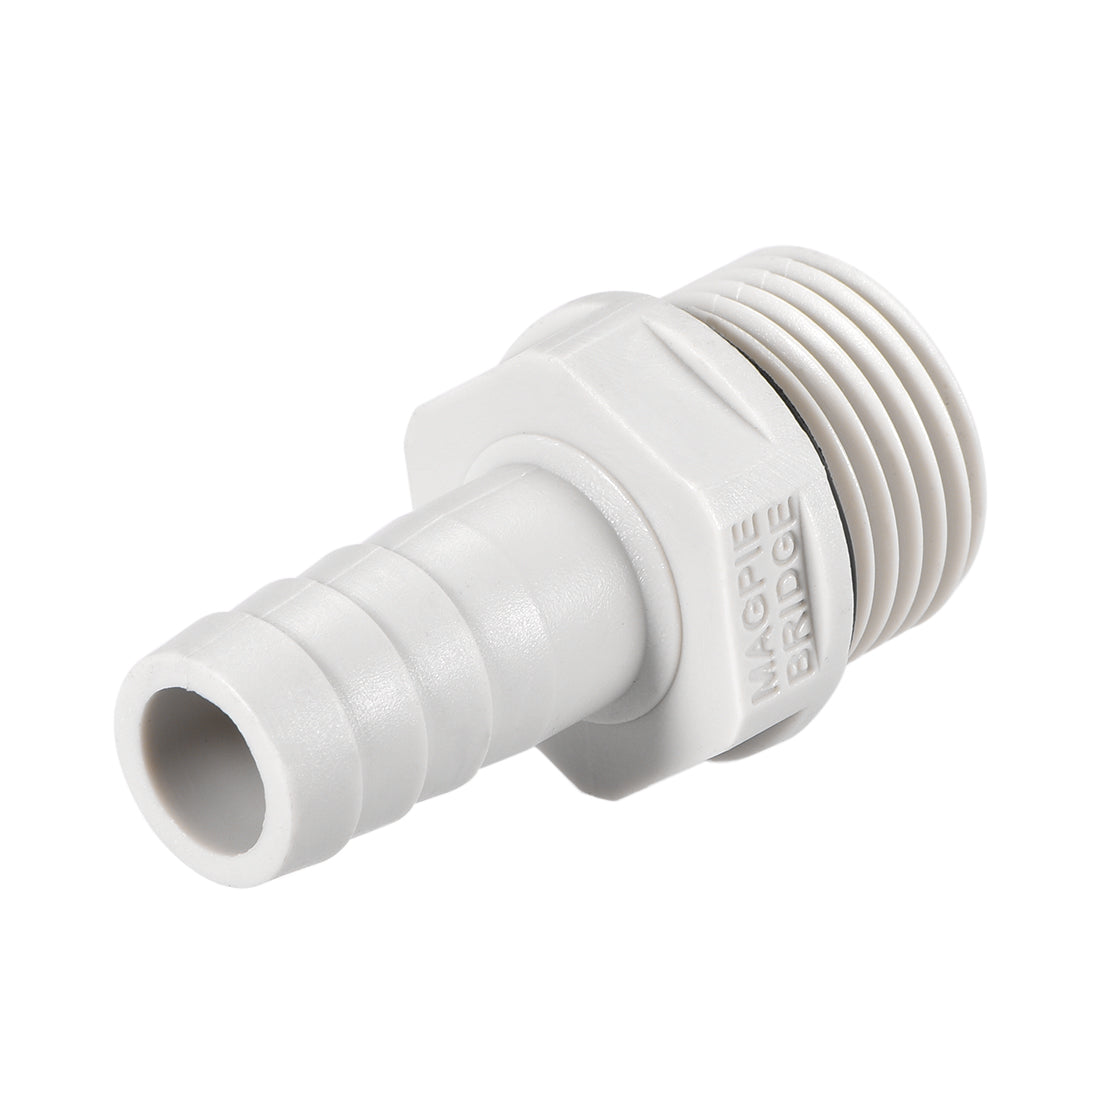 Uxcell Uxcell PVC Barb Hose Fitting Connector Adapter 10mm or 25/64" Barbed x 1/2" G Male Pipe 10pcs